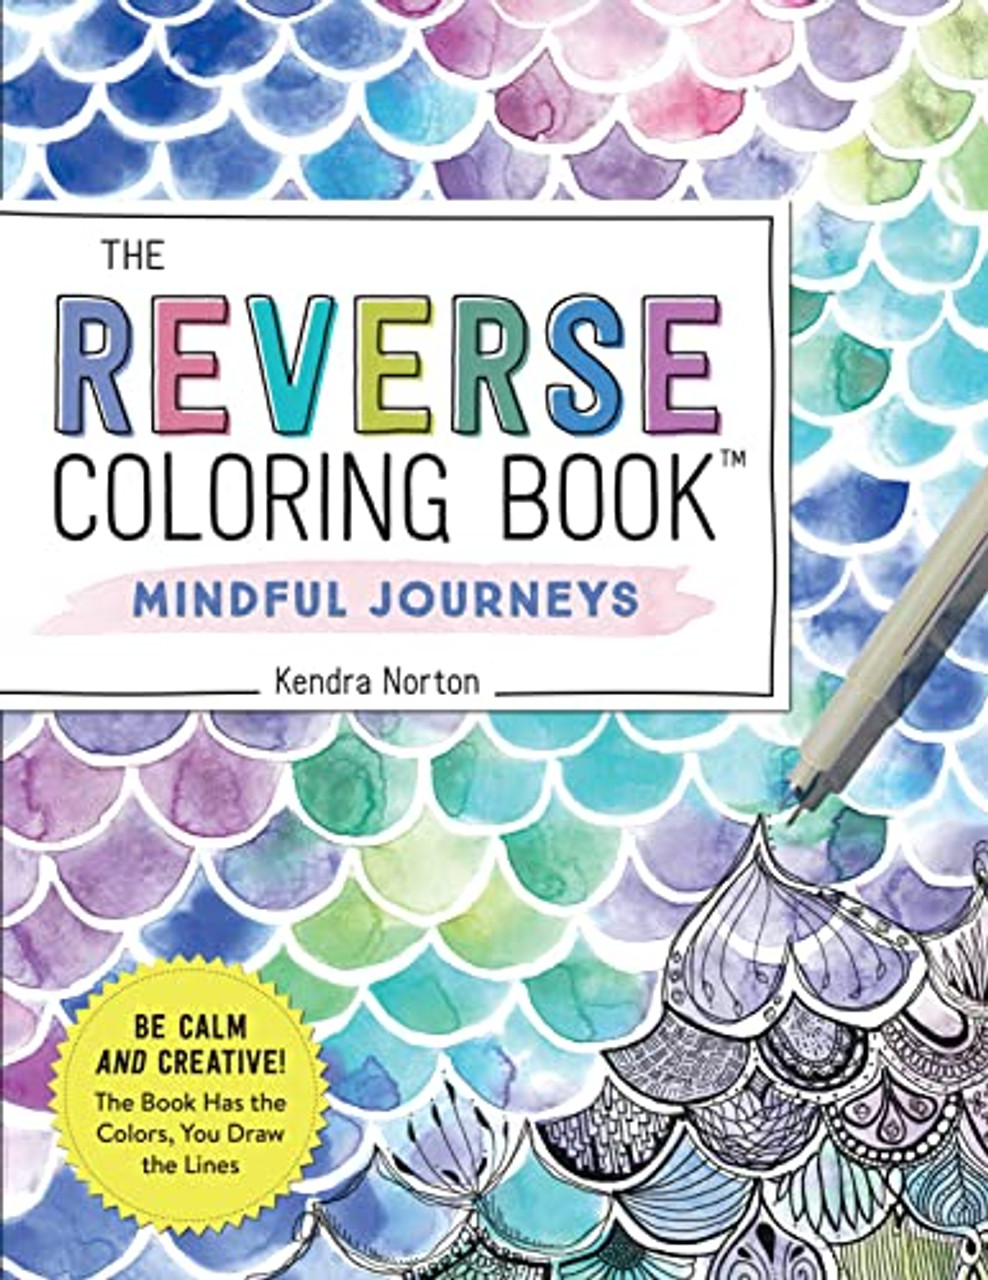 Reverse Coloring Book for Anxiety Relief: Draw Designs on Watercolor Art [Book]